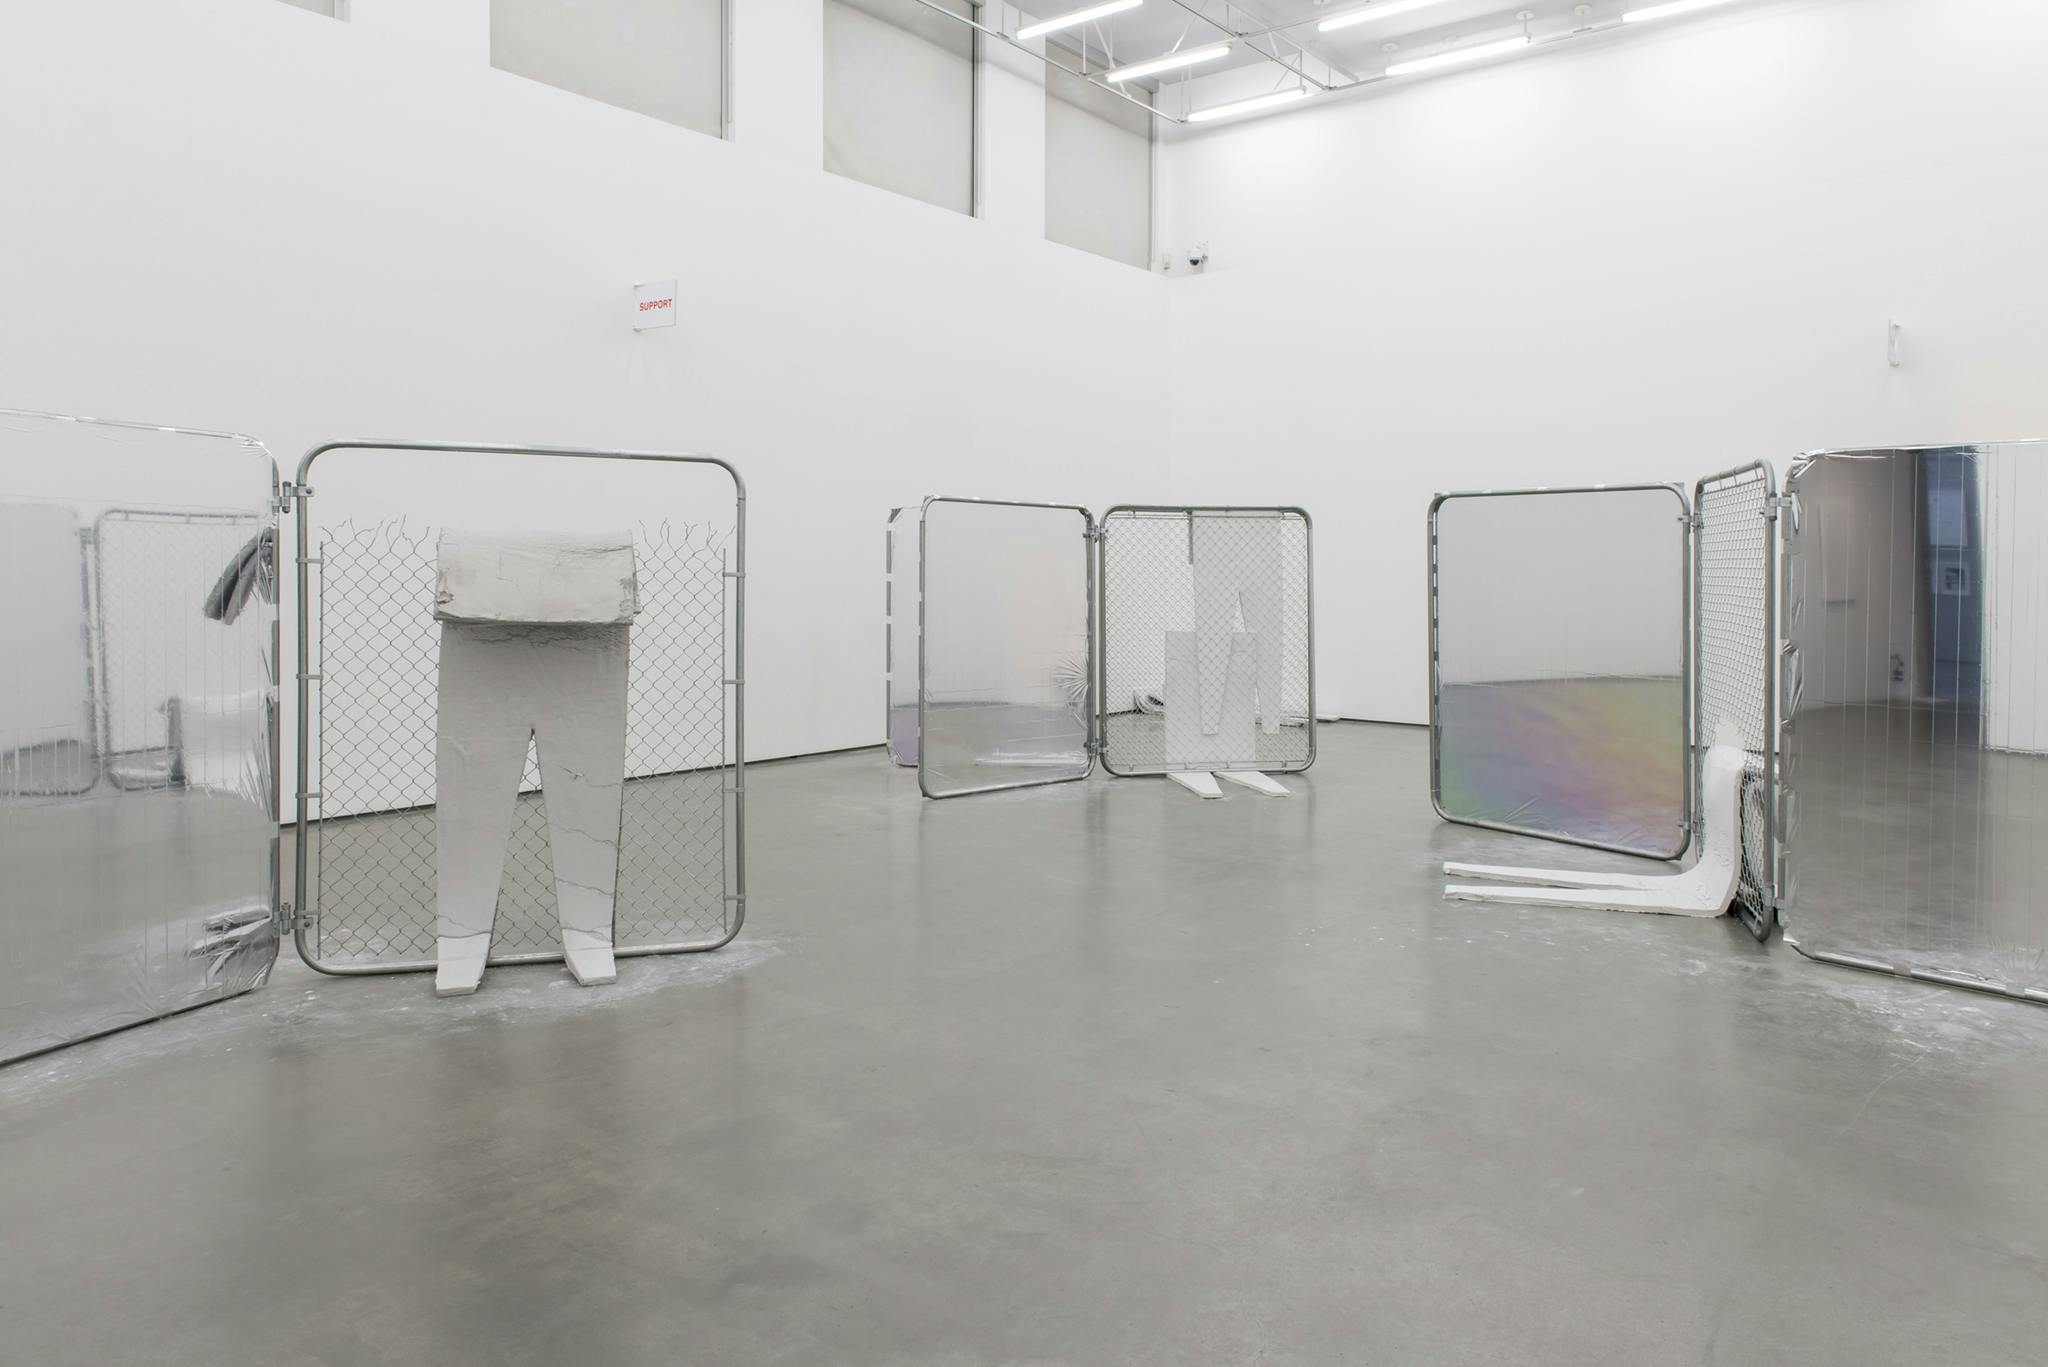 Various chain link fences sit staggered within a gallery space. Some have emergency blankets stretched taut in replace of chain links while thin, foam cutouts in human-like forms lean against others.